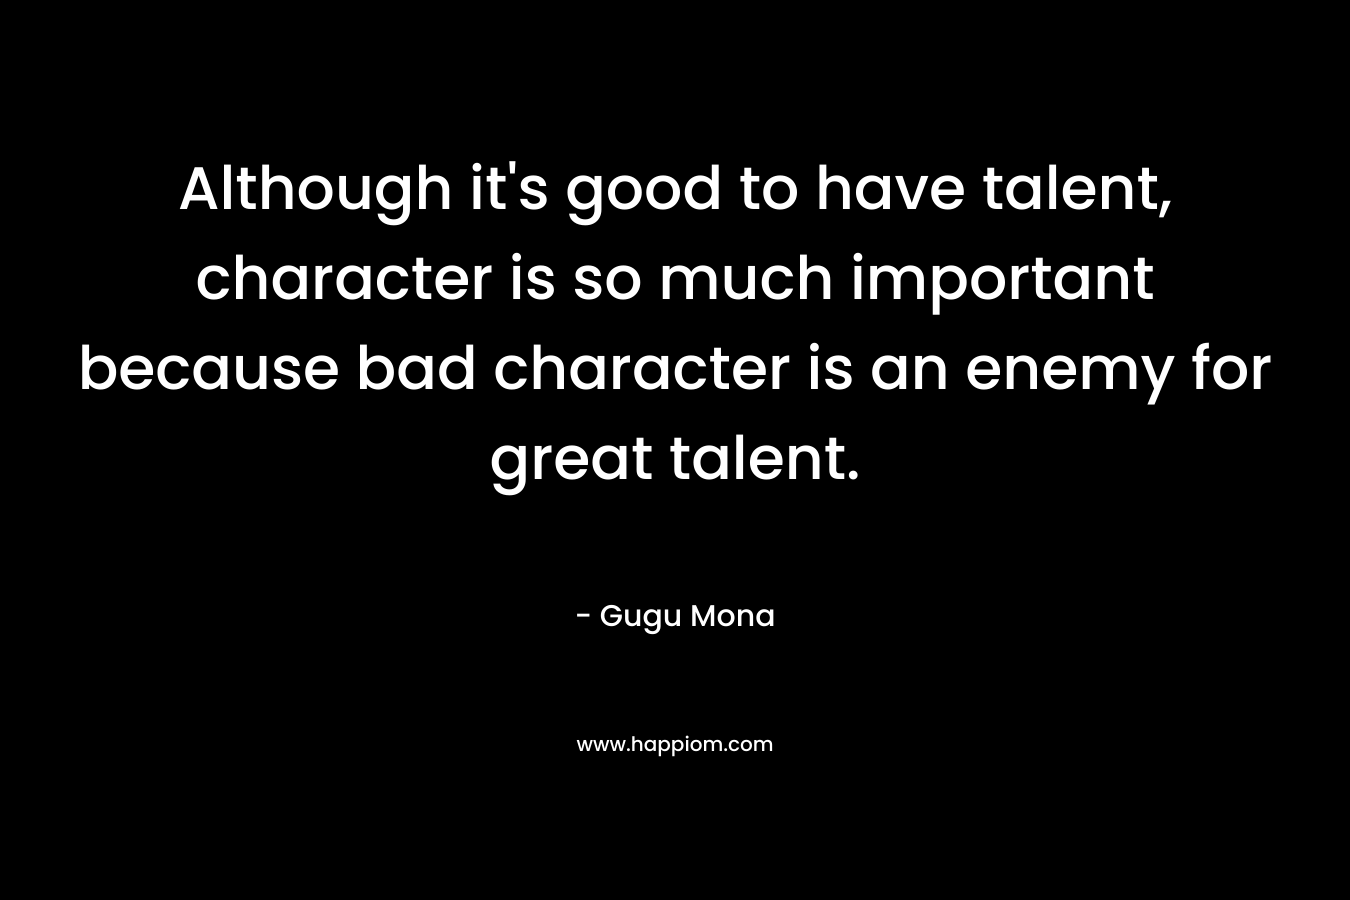 Although it's good to have talent, character is so much important because bad character is an enemy for great talent.